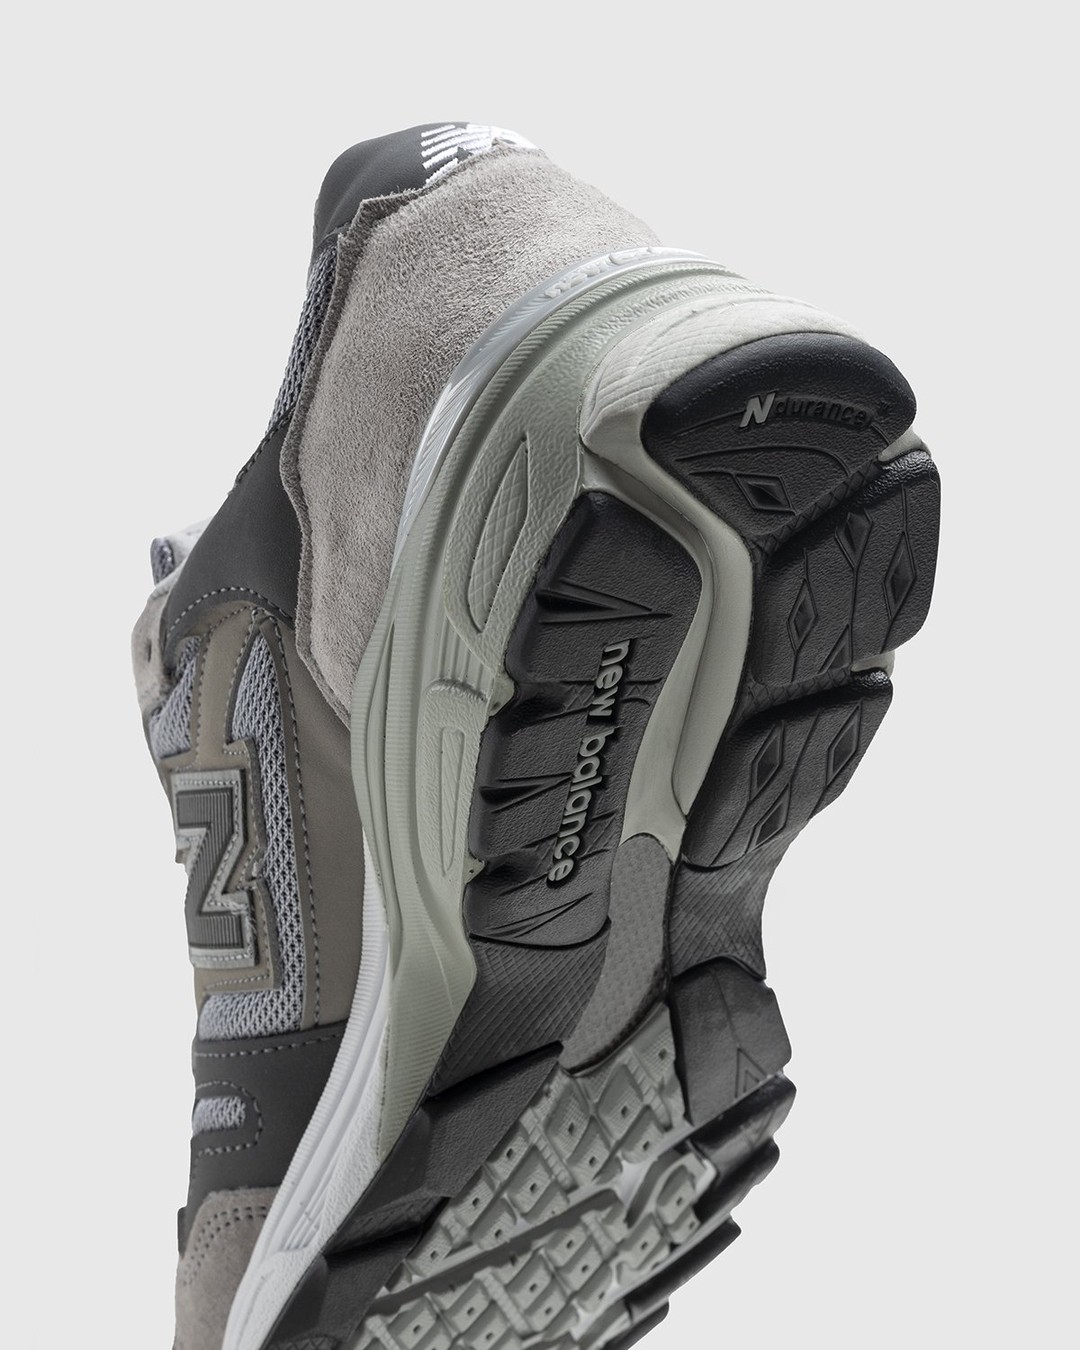 New Balance – M920GRY Grey - Sneakers - Grey - Image 5